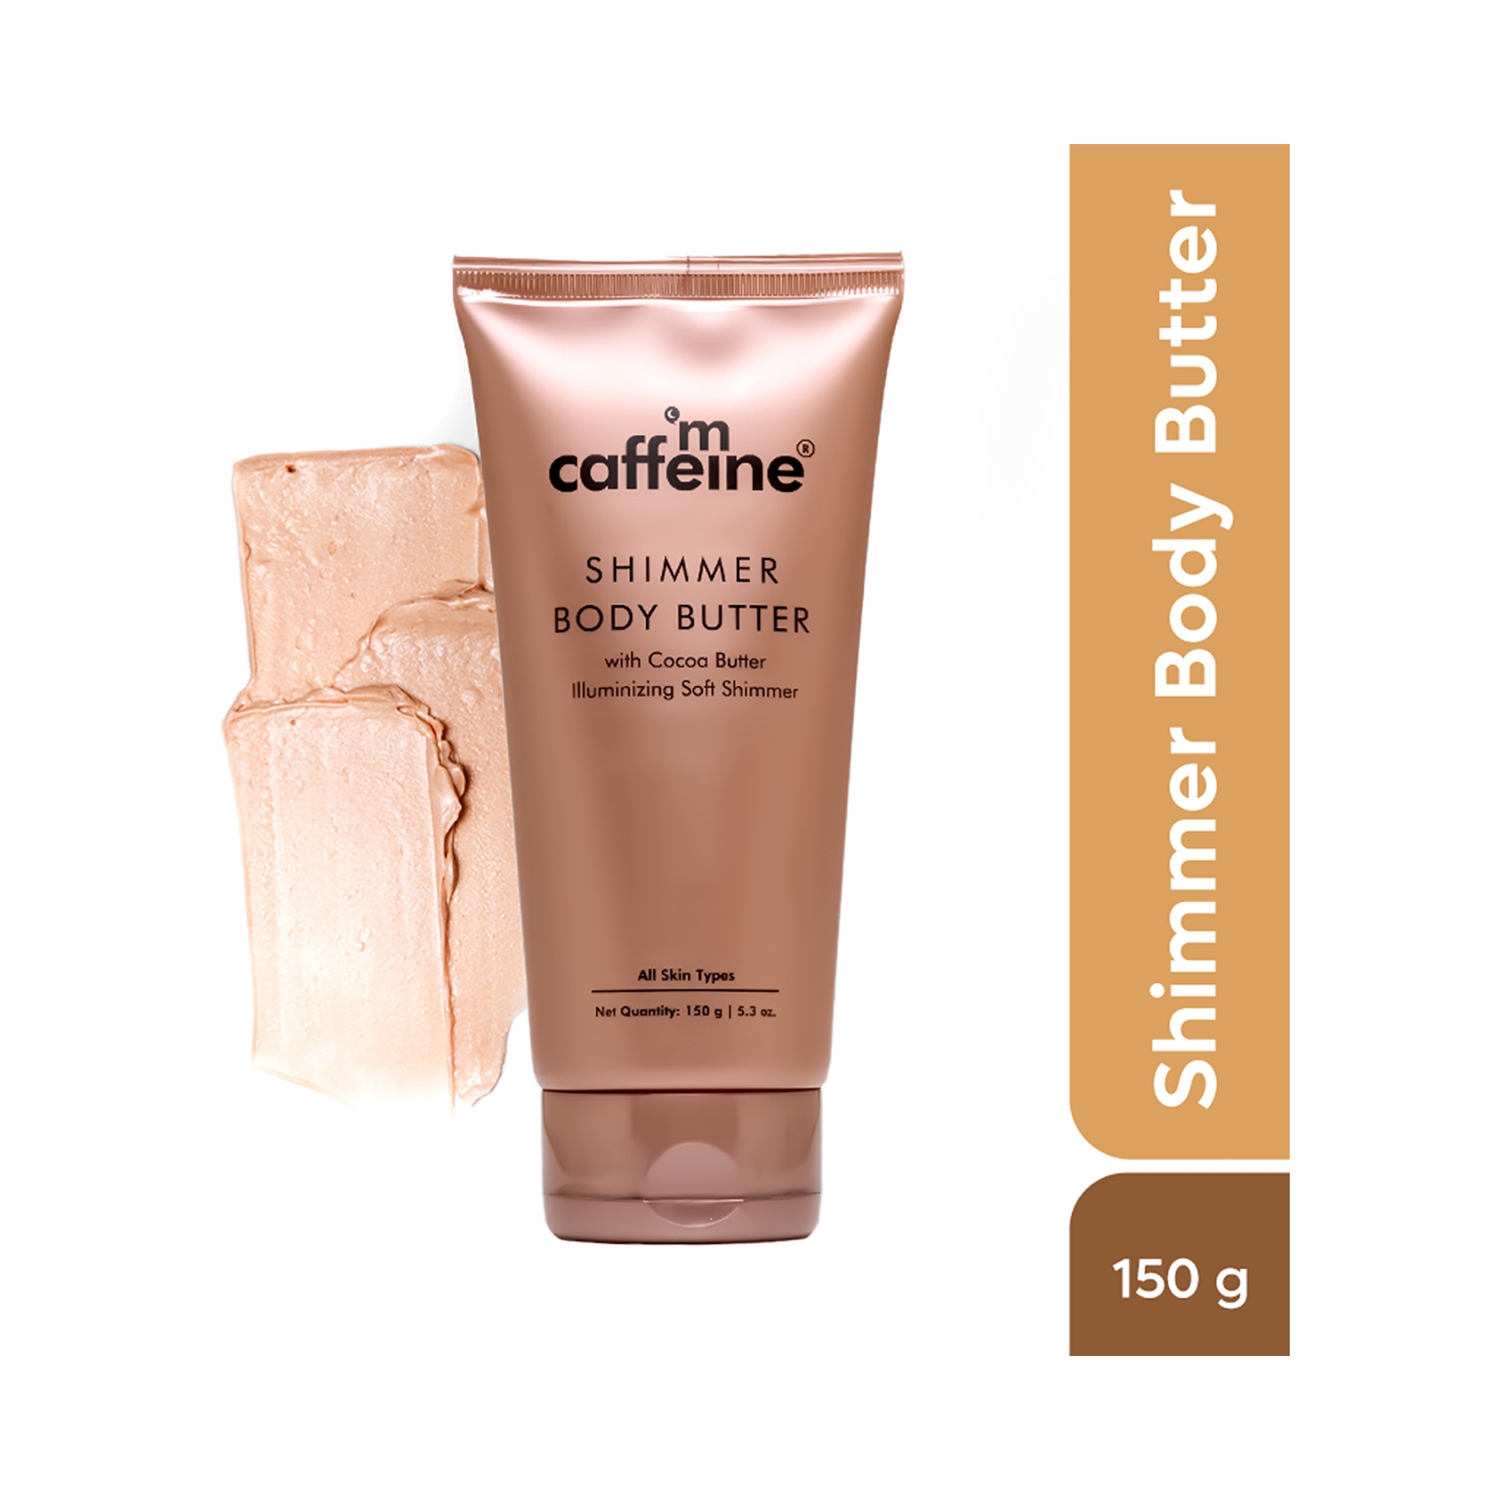 mCaffeine | mCaffeine Shimmer Body Butter with Cocoa Butter for Shimmery & Glowing Skin (150g)